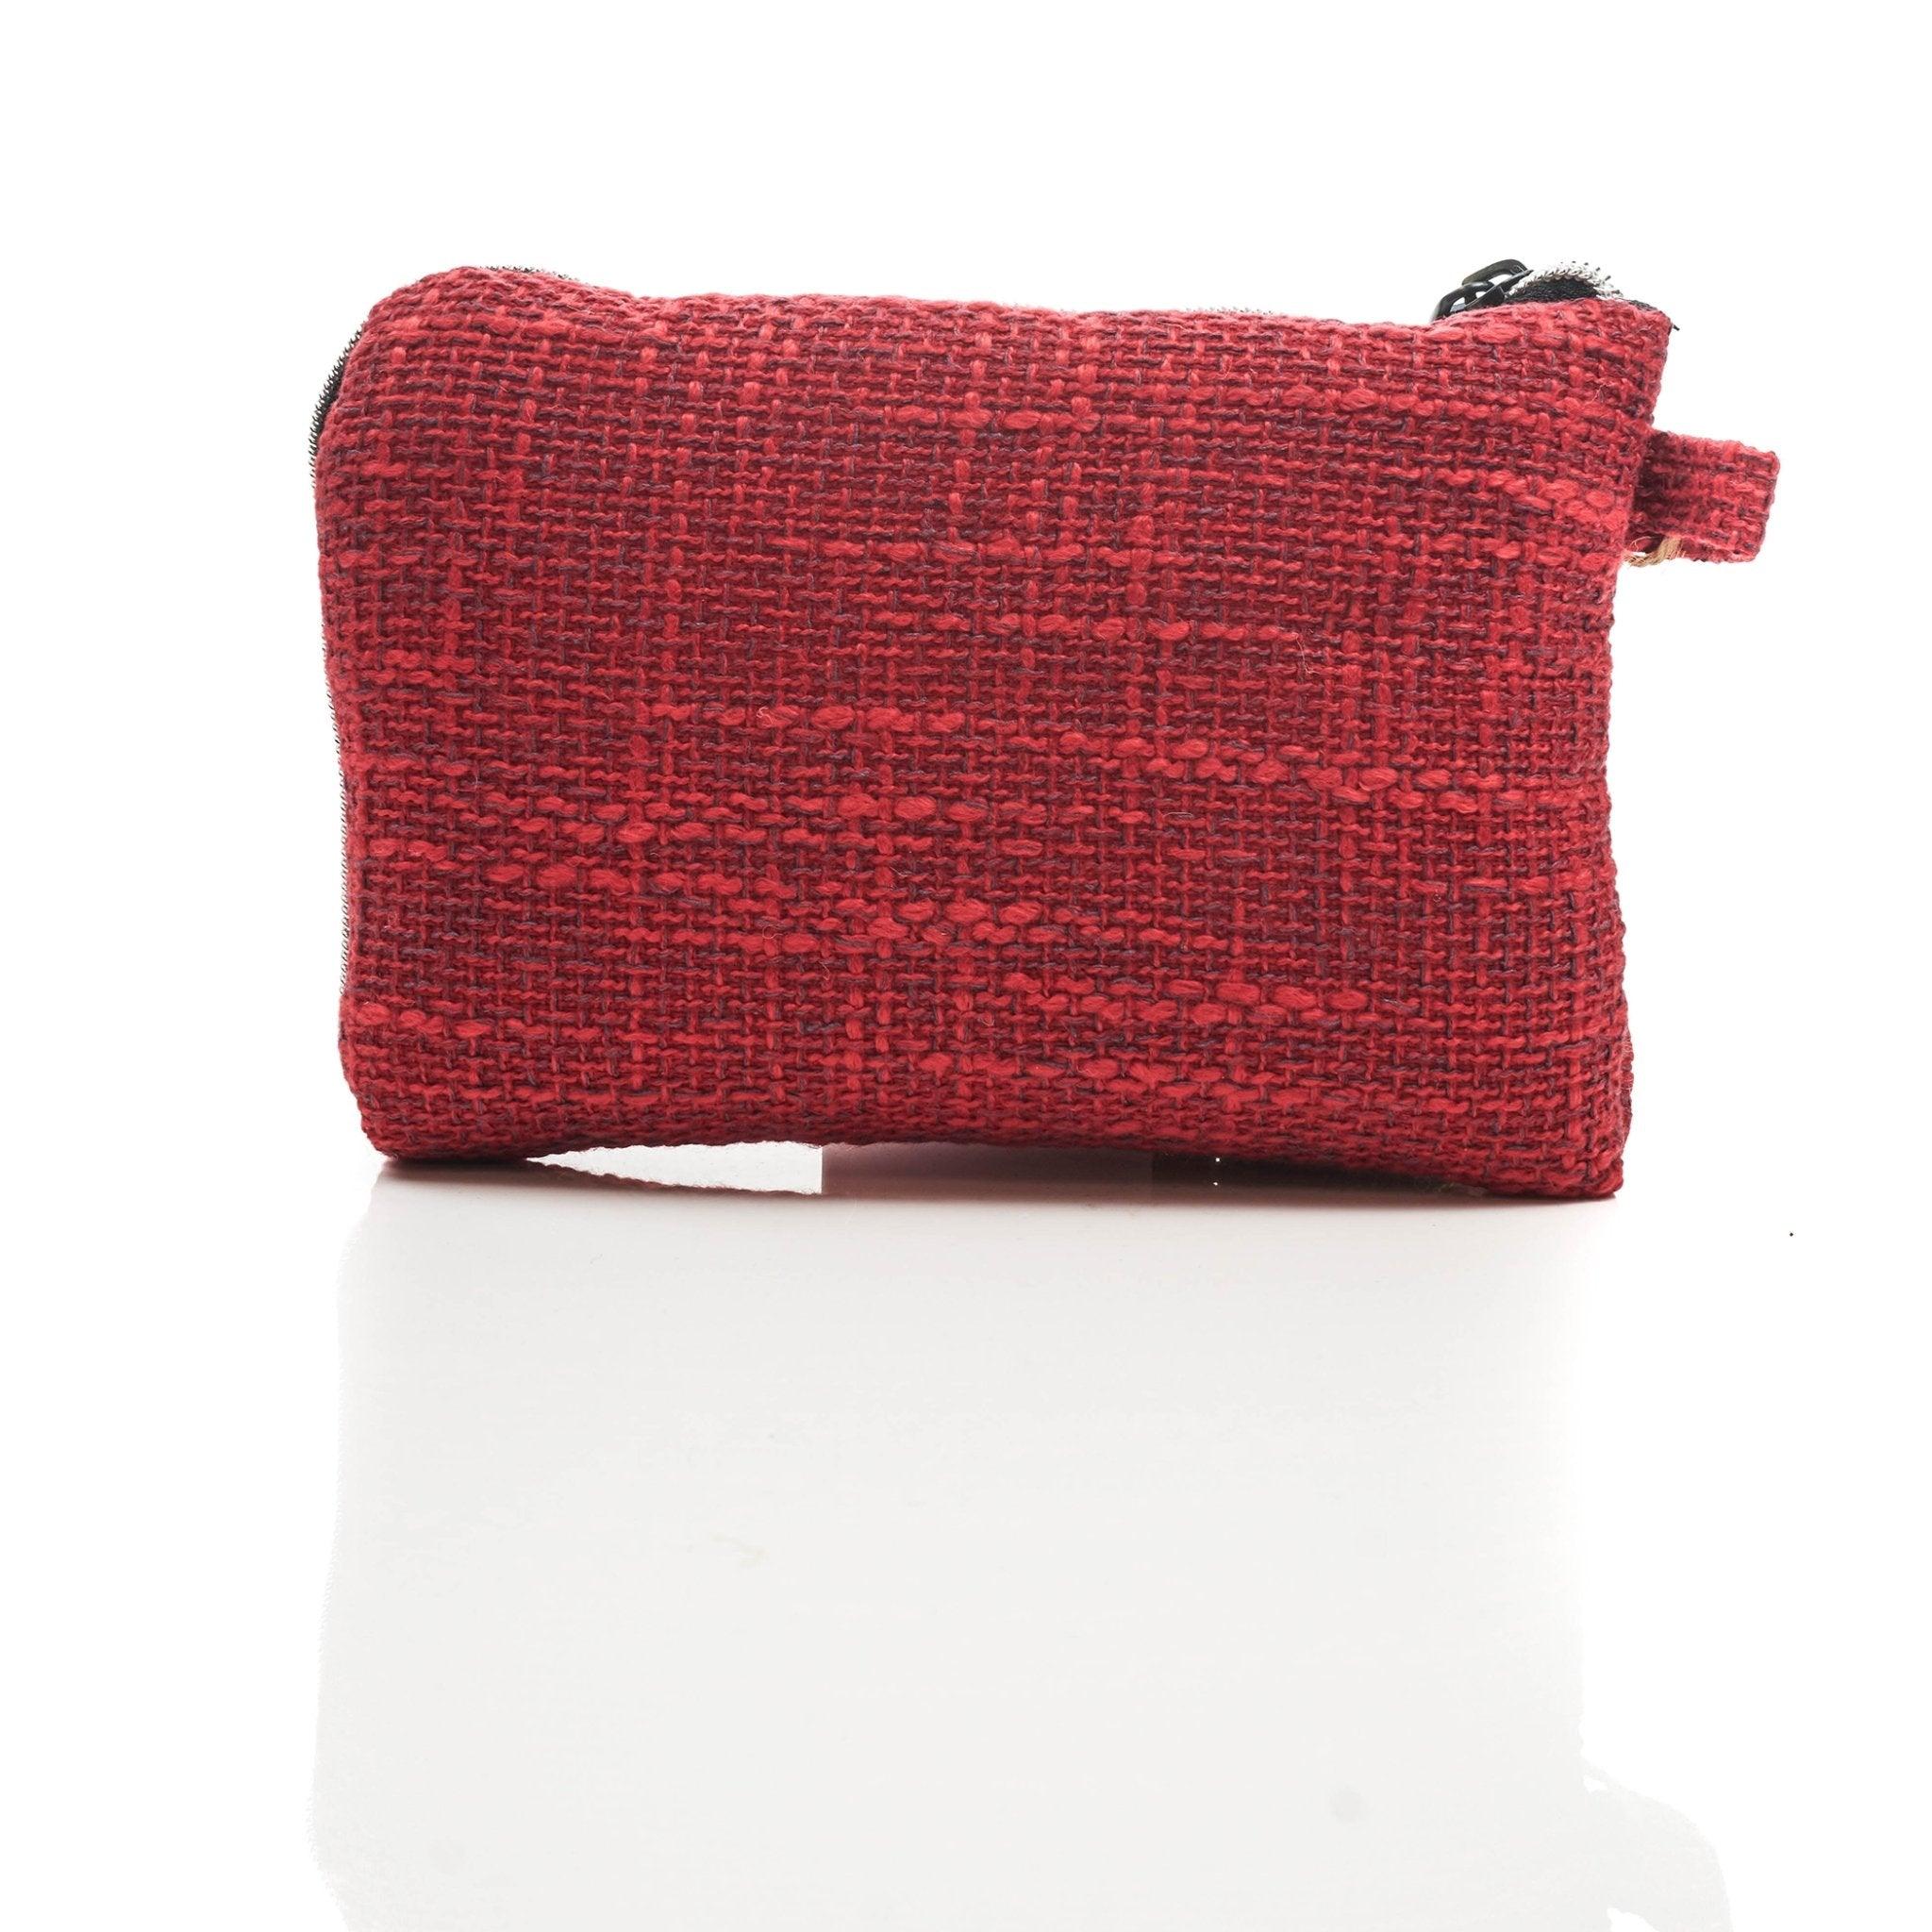 Dime Bag Accessories Dime Bag 8" padded pouch - red